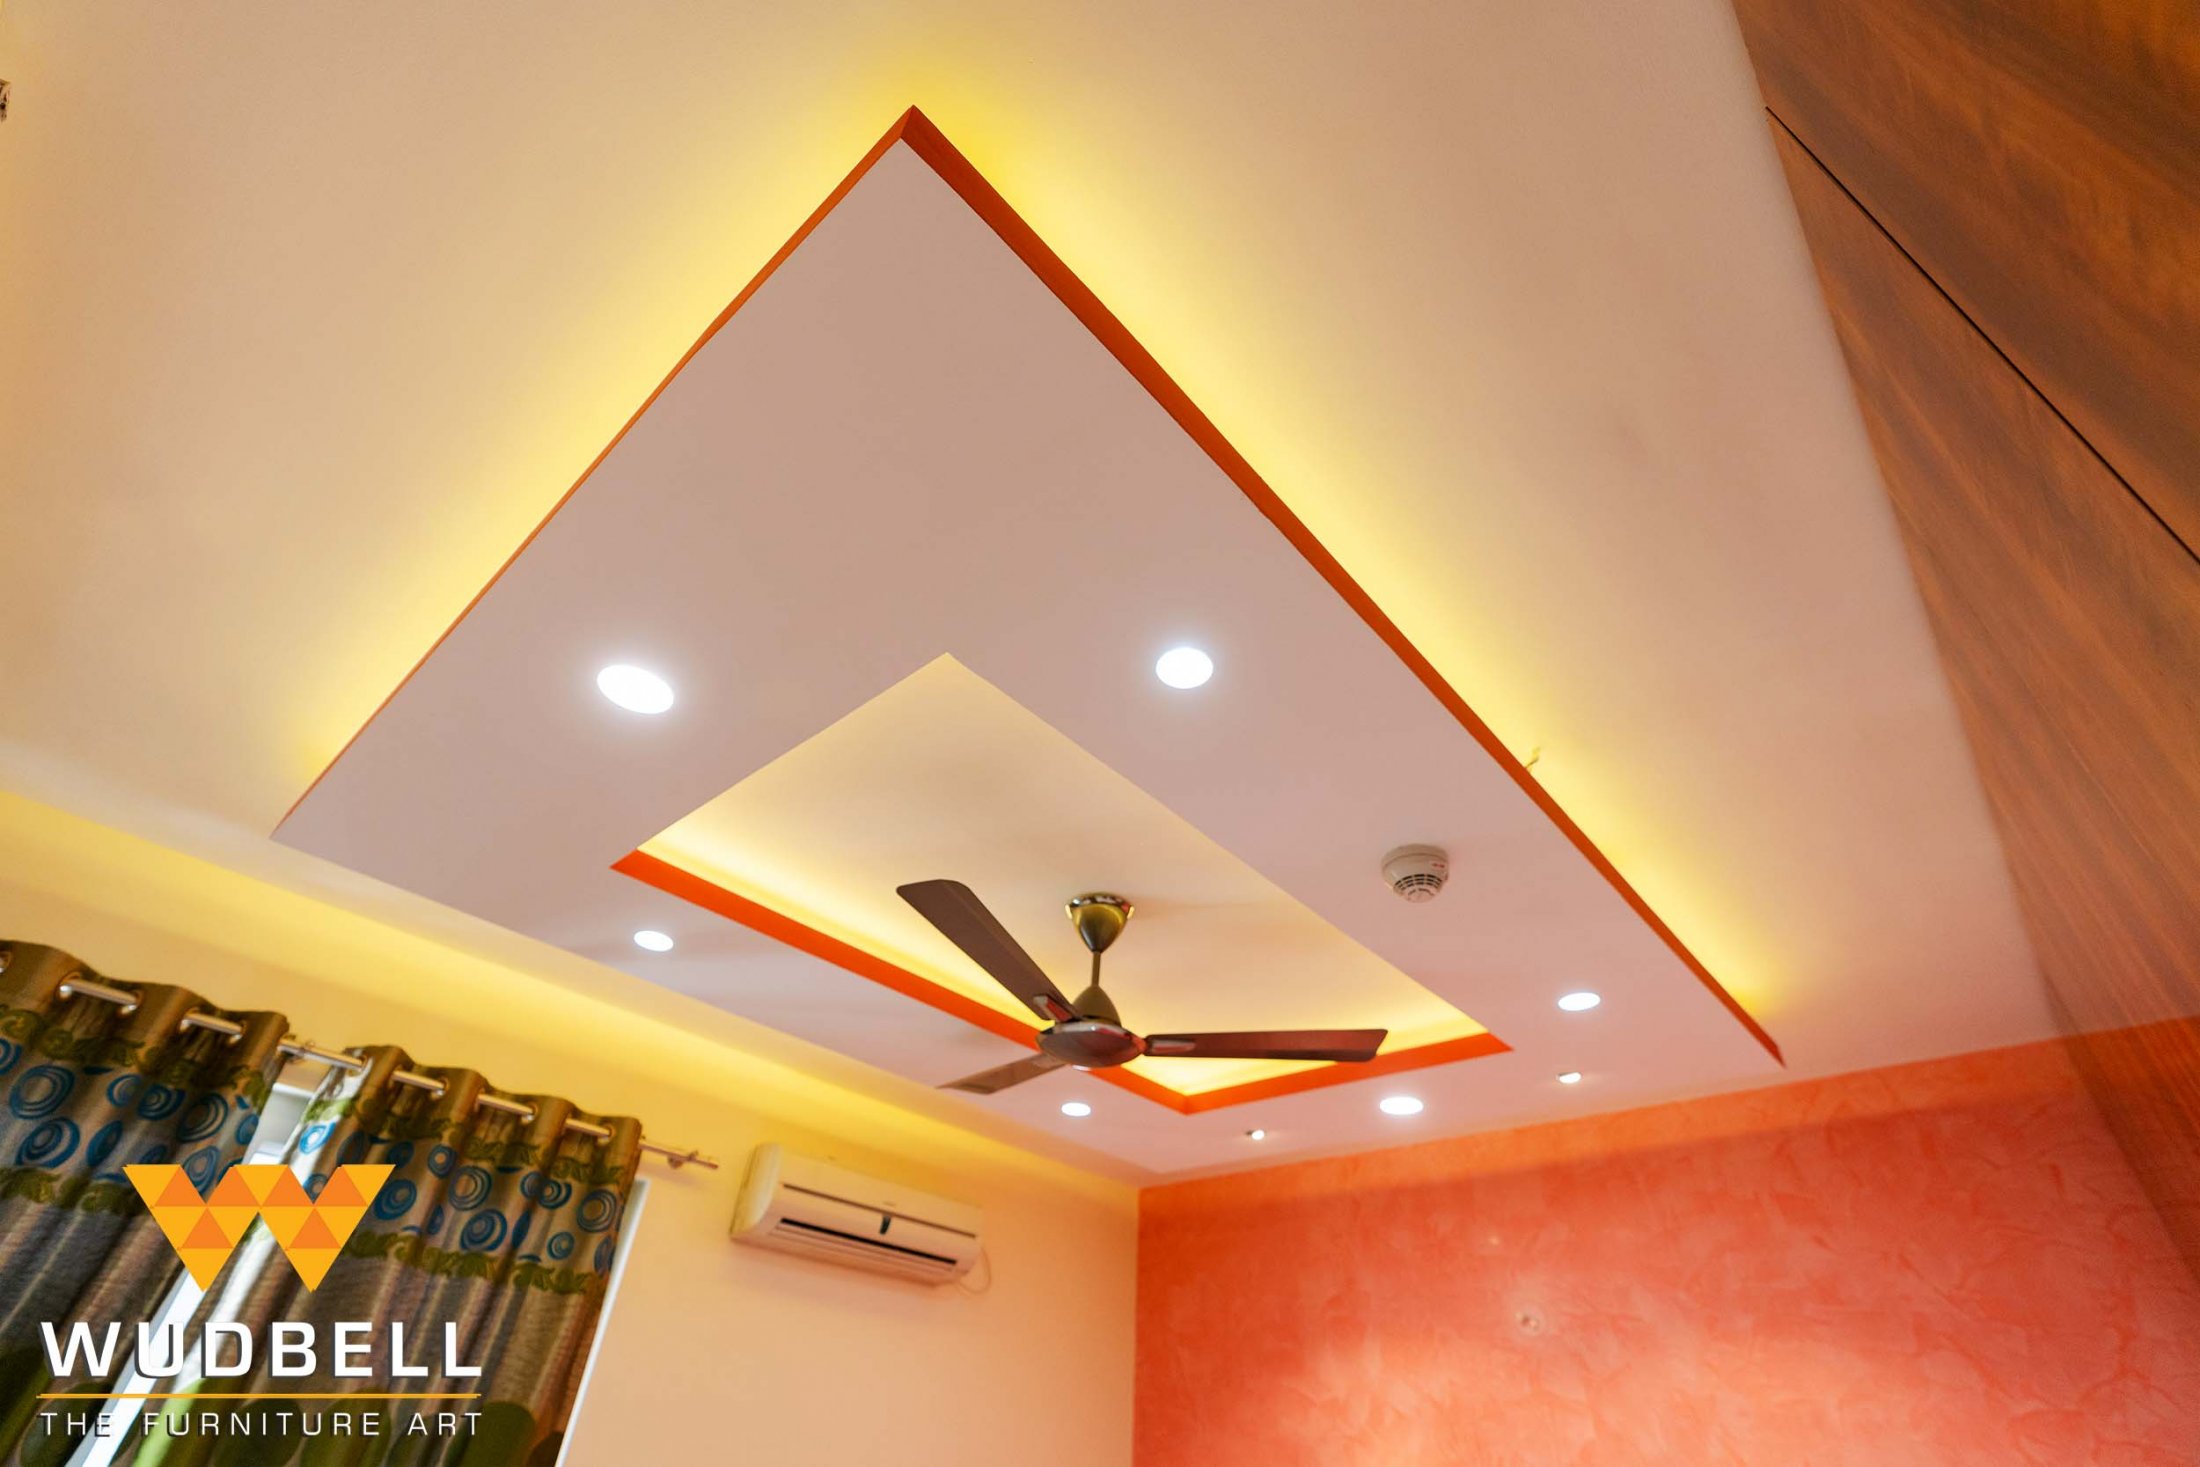 The False ceiling with LED indirect lighting